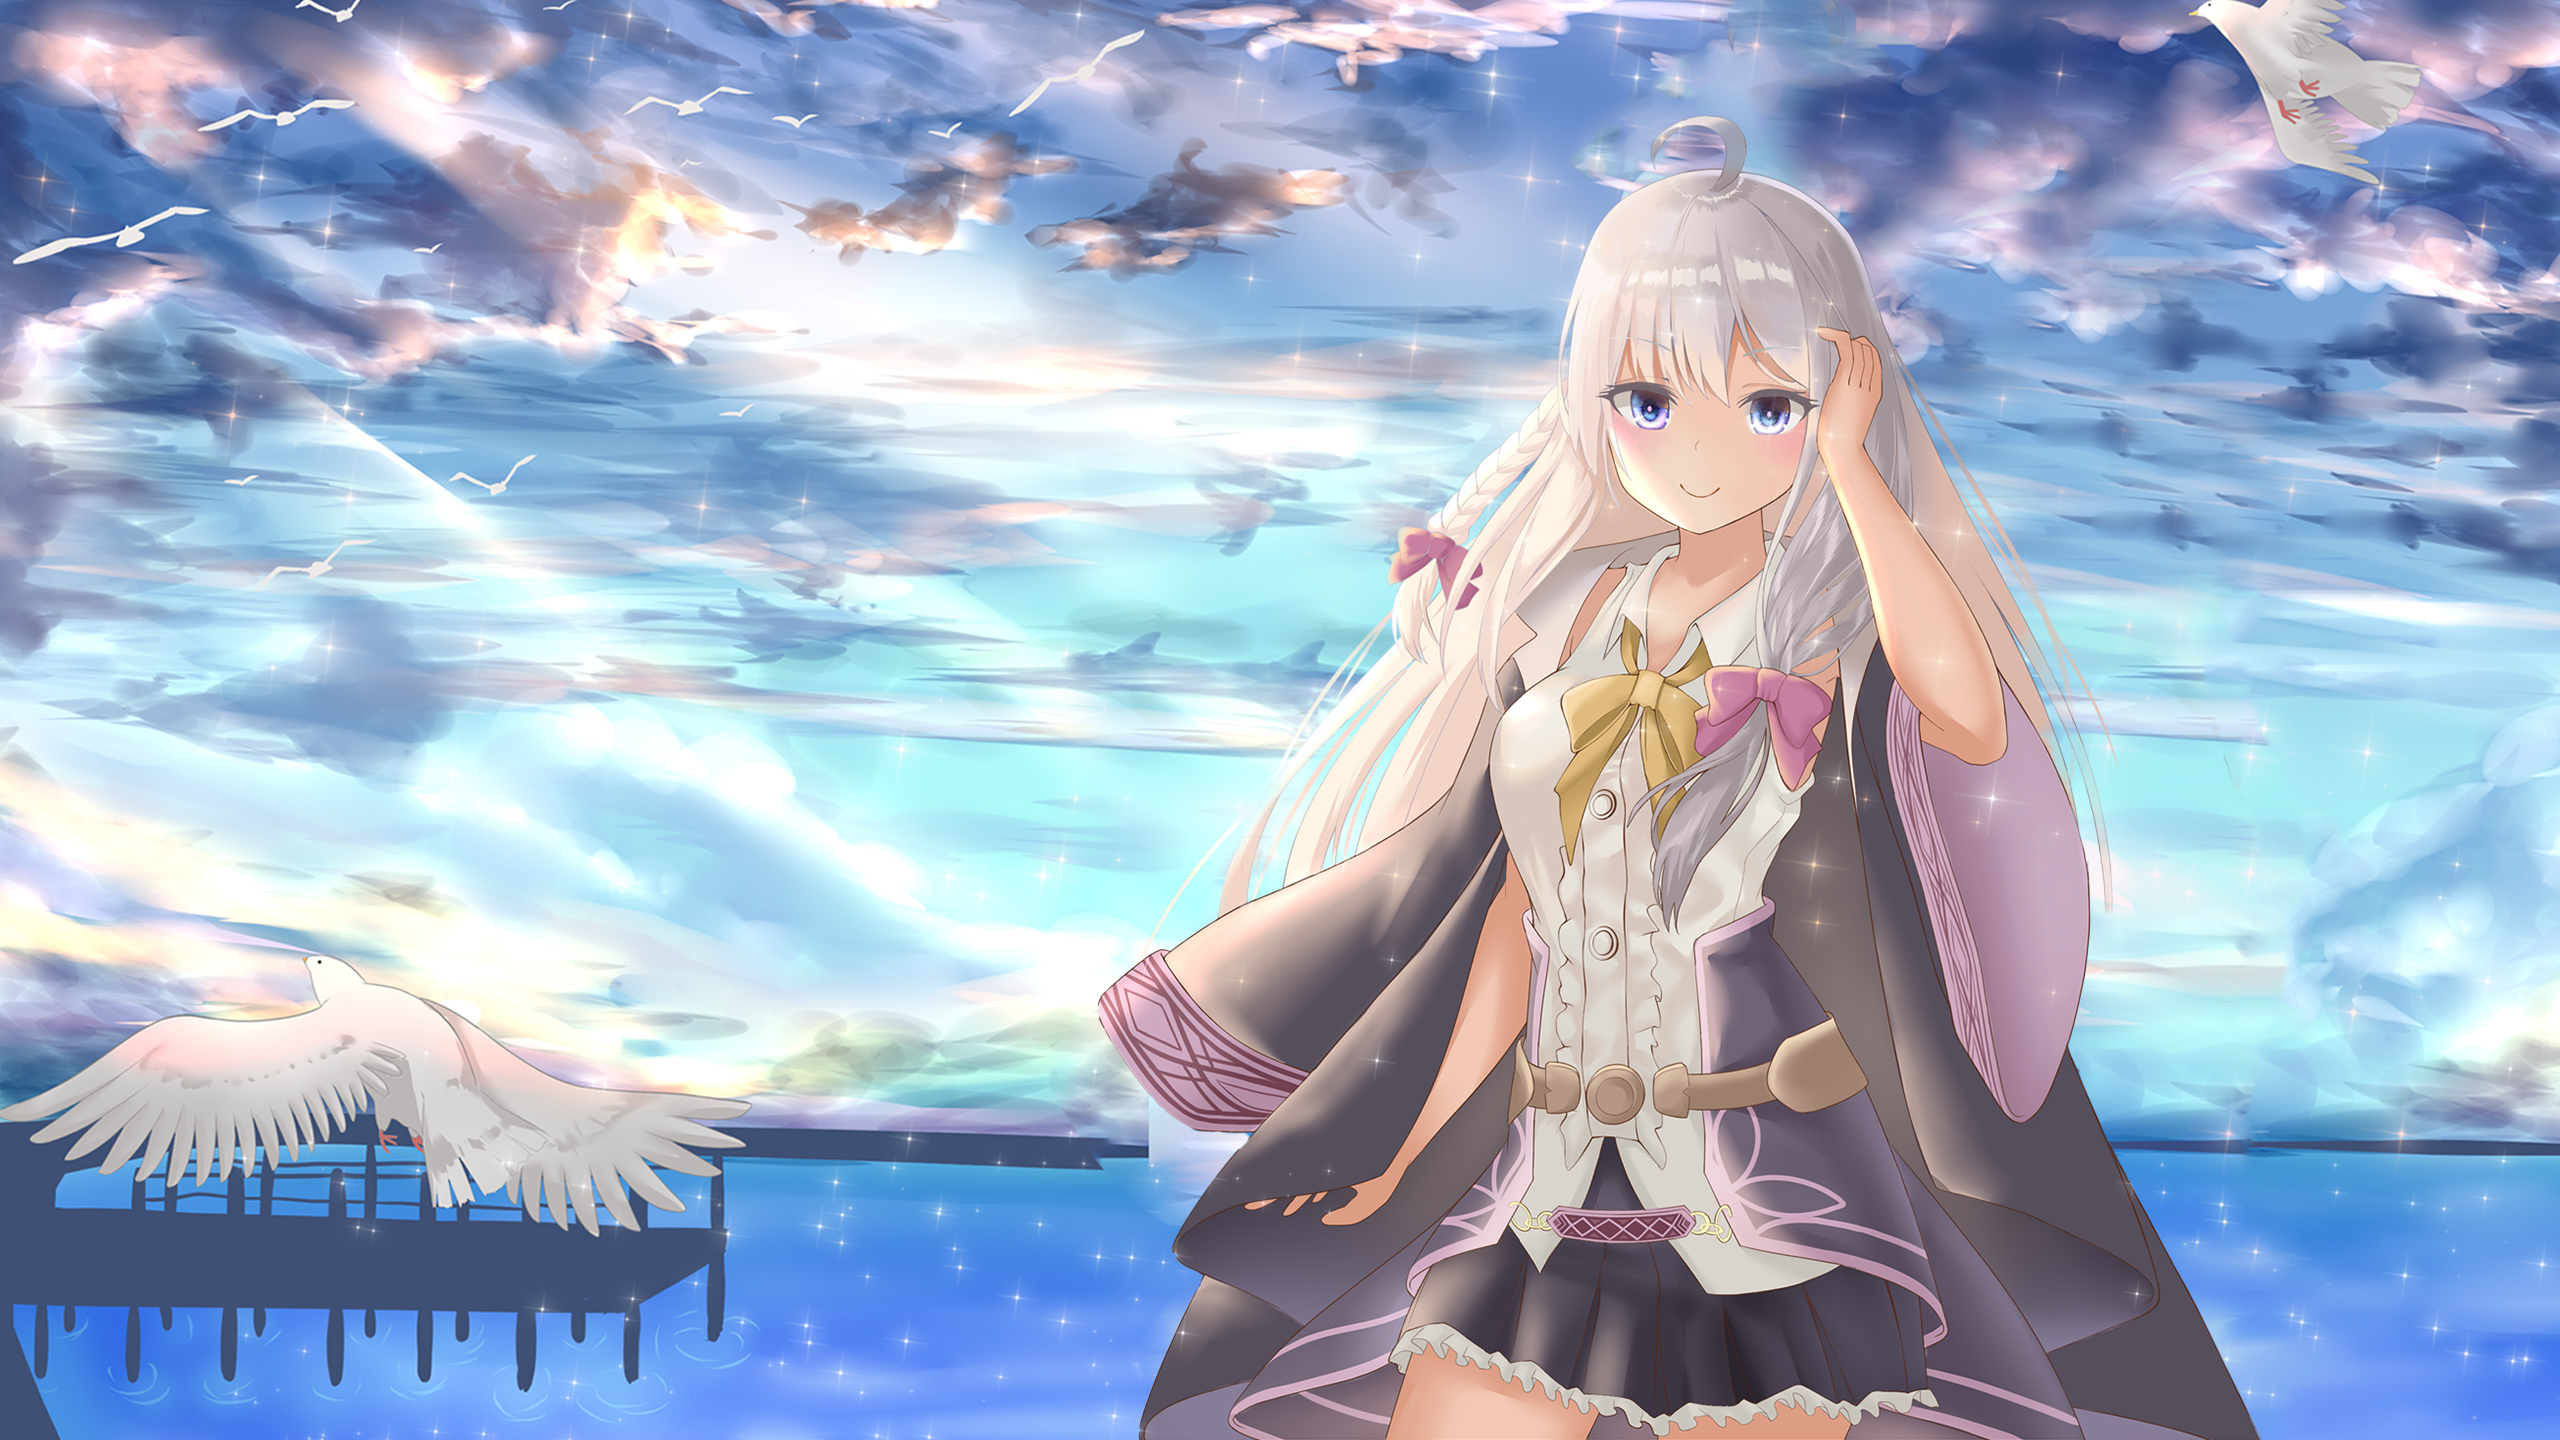 Anime The Journey of Elaina HD Wallpaper by 原田 はるき